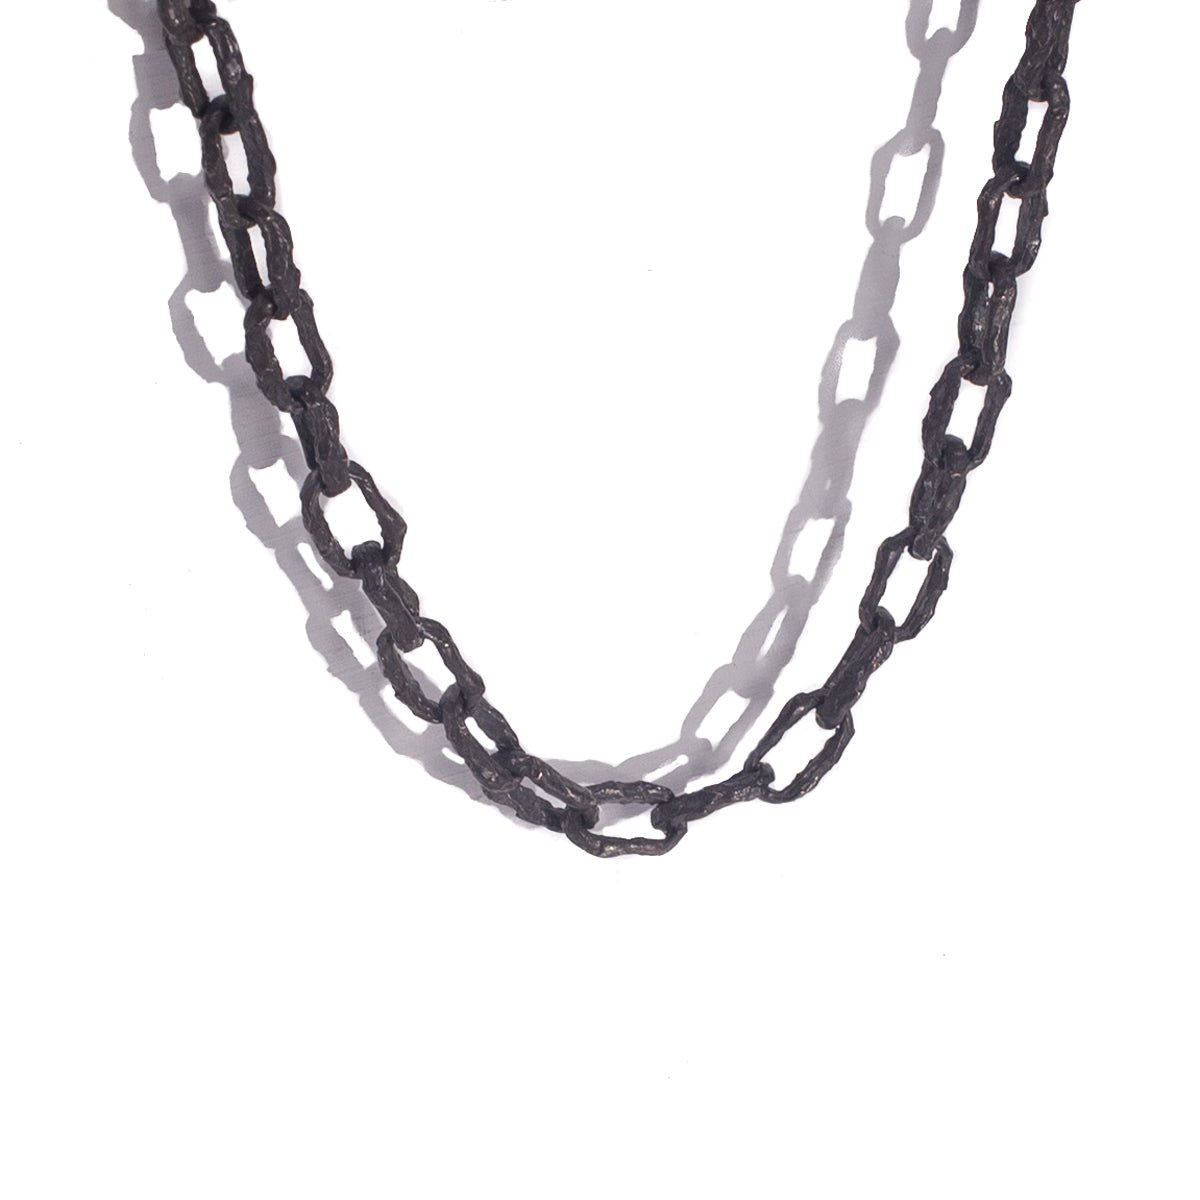 Ula Chain Necklace | Black Oxidized 925 Sterling Silver 16